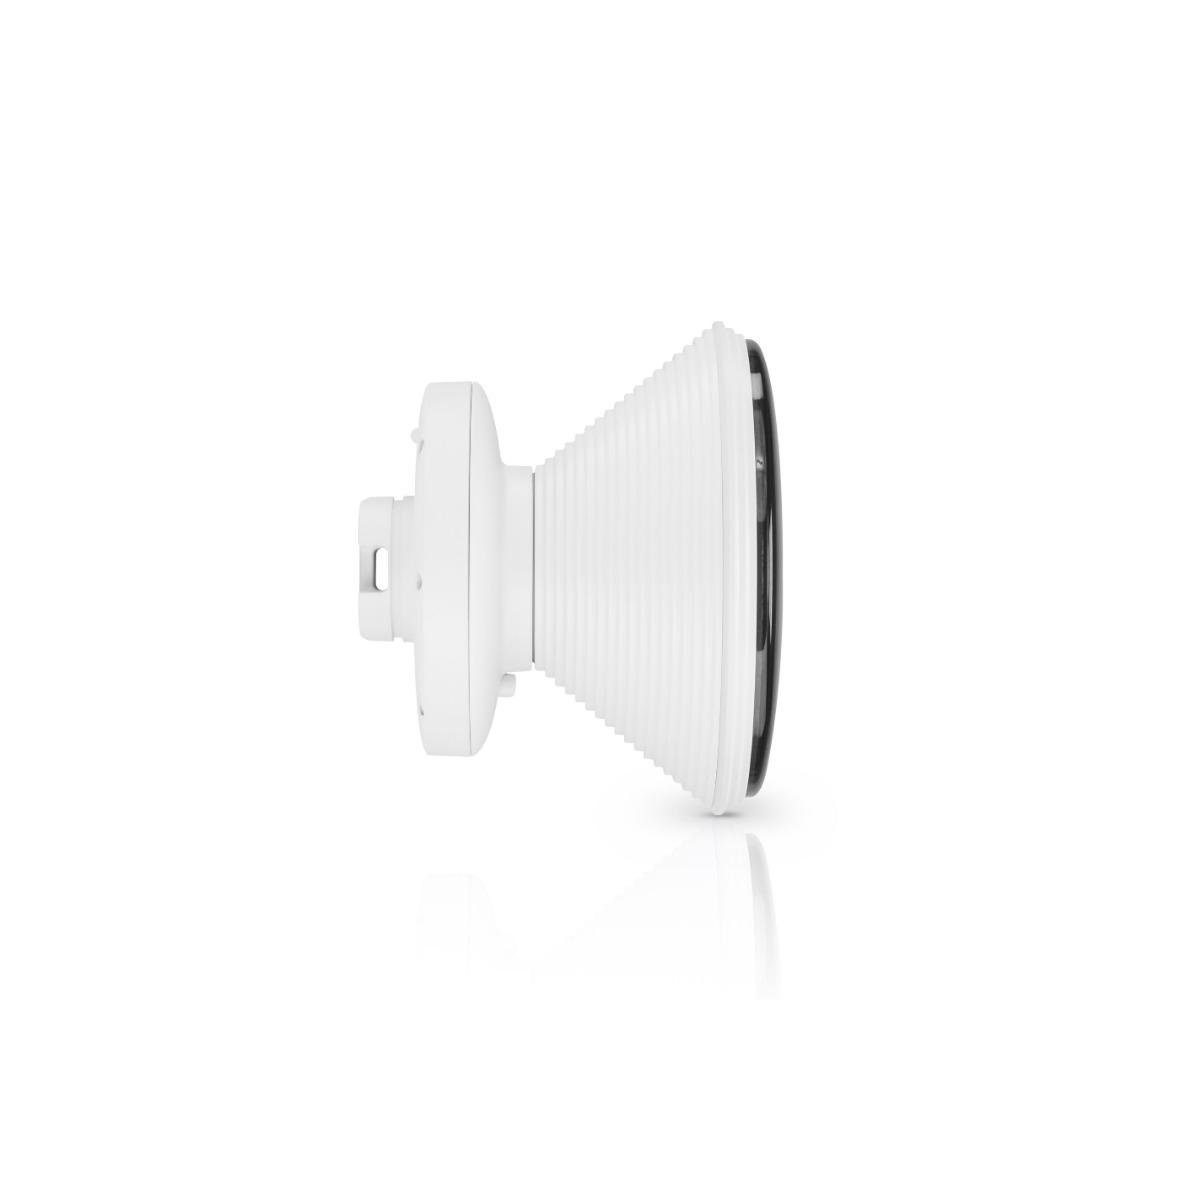 Ubiquiti Networks IS-M5 - 5 dBi... GHz CPE 14 WLAN-Access Point airMAX Funkmodul, IsoStation